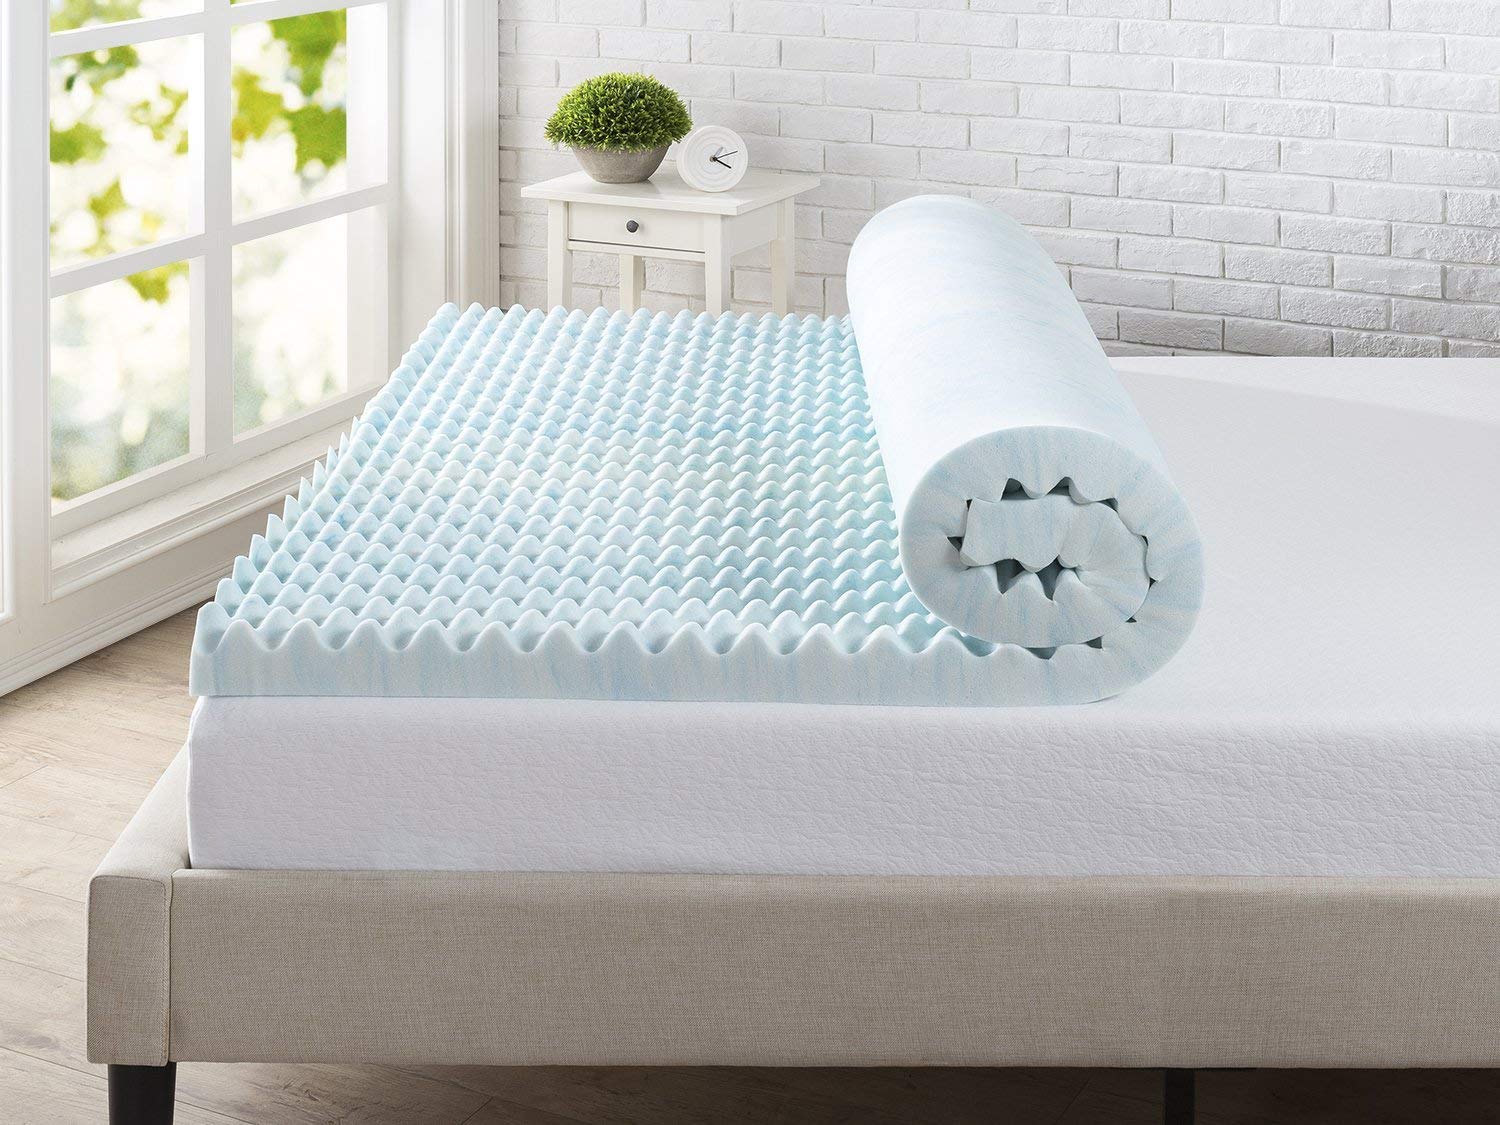 Top 10 Best Firm Mattress Toppers in 2021